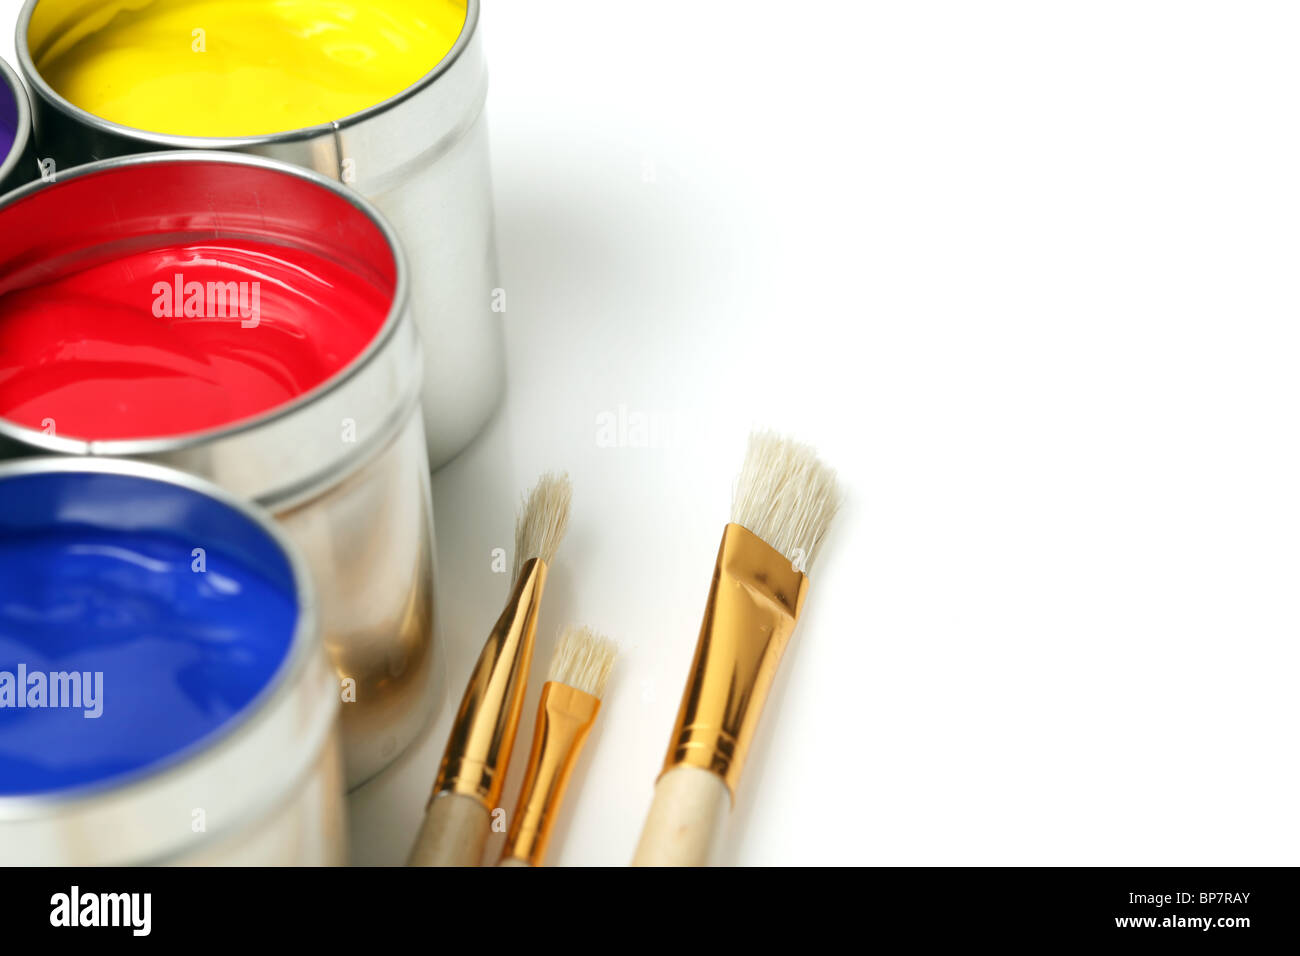 Cans of paint with paintbrushes Stock Photo